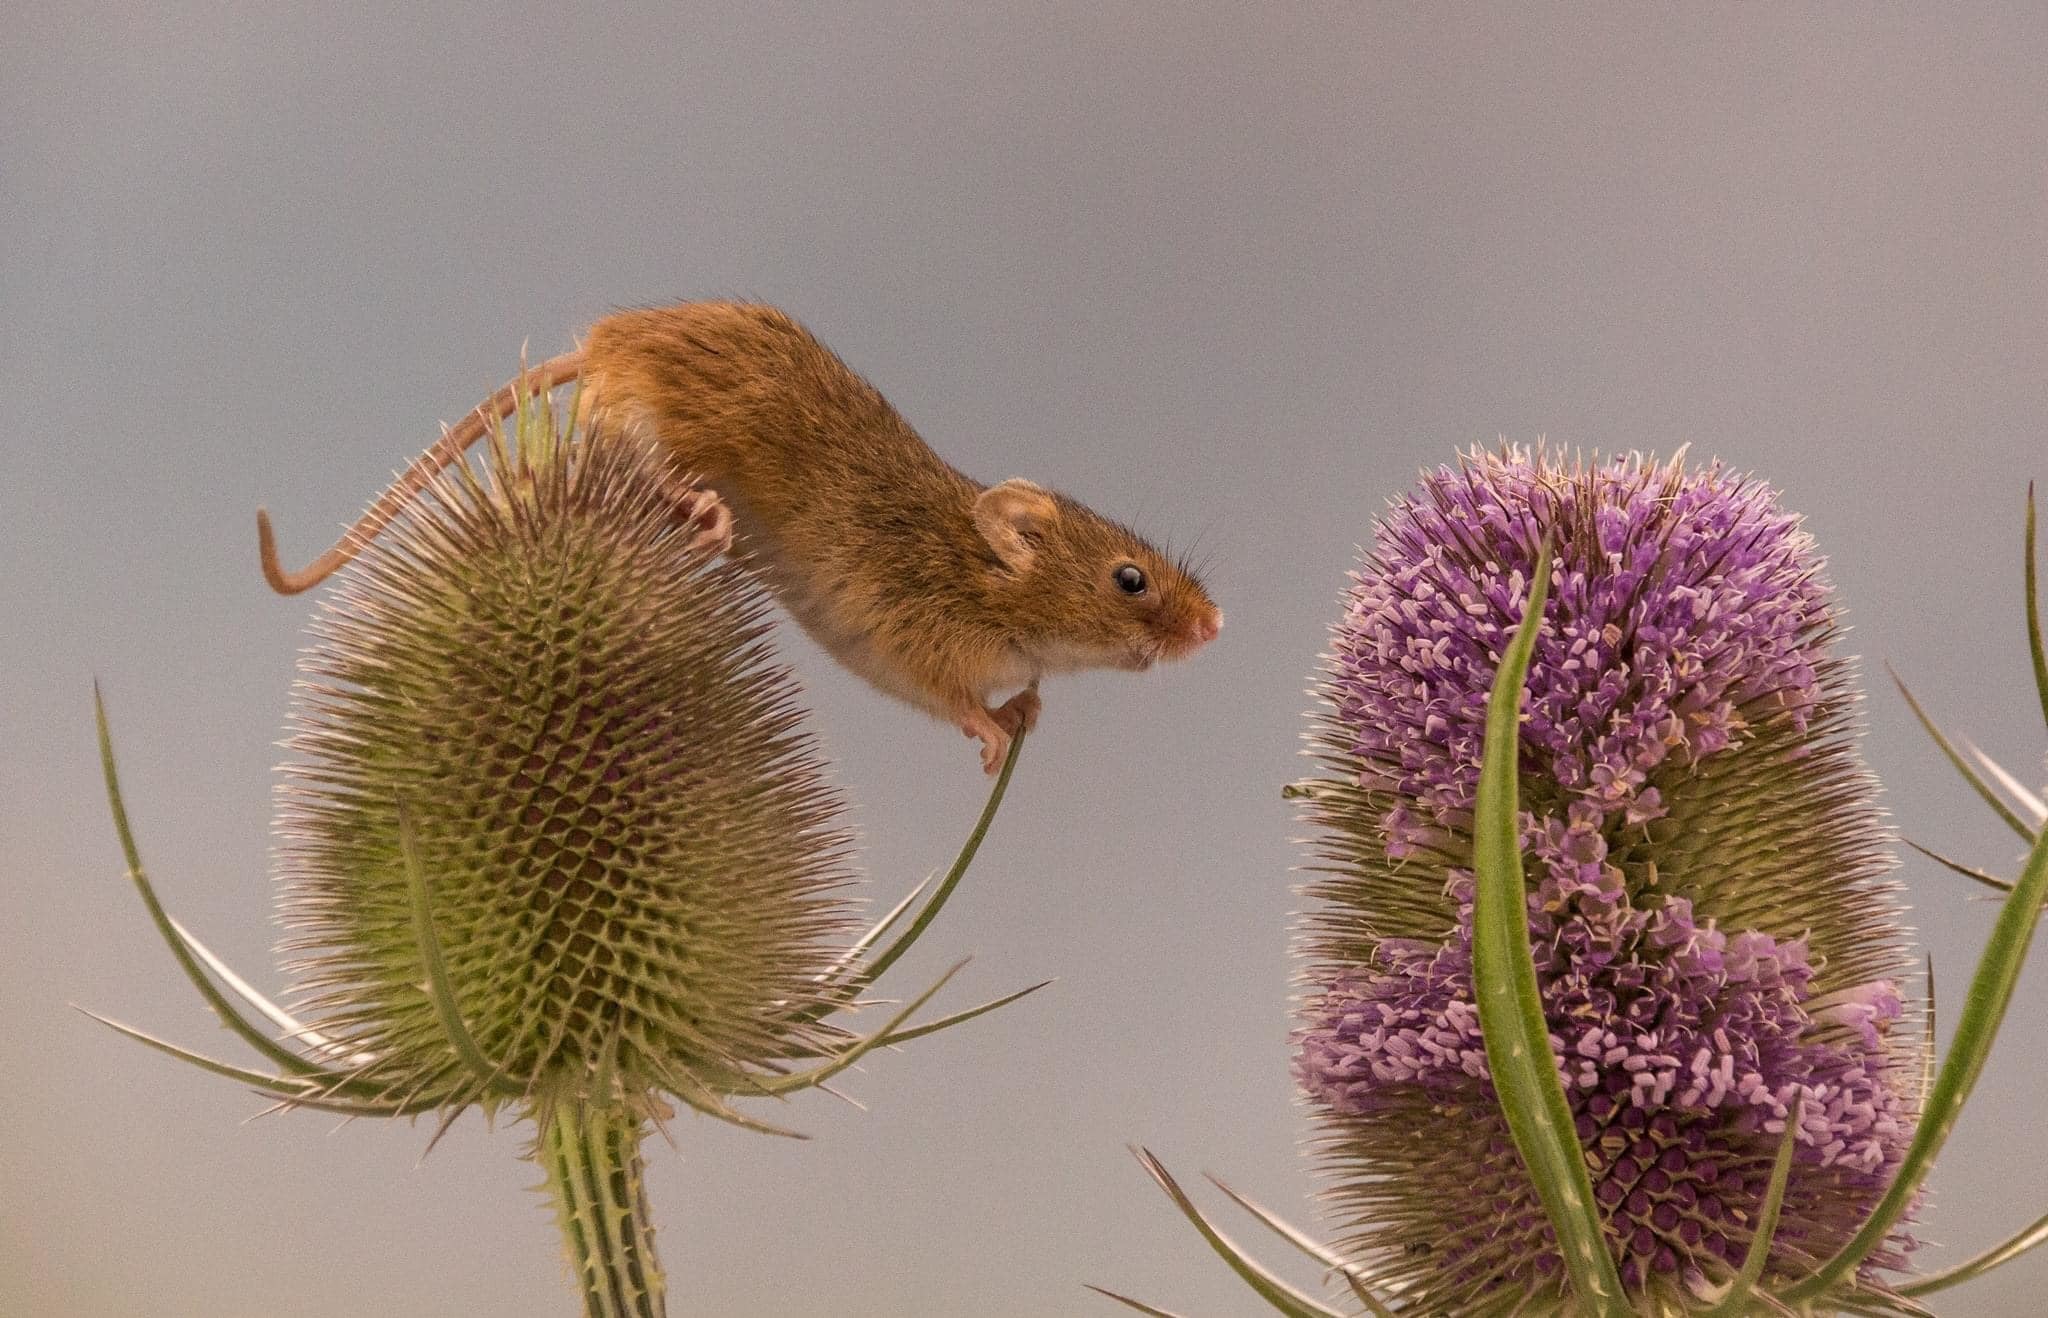 Practising for the high jump by Hilary Bradshaw